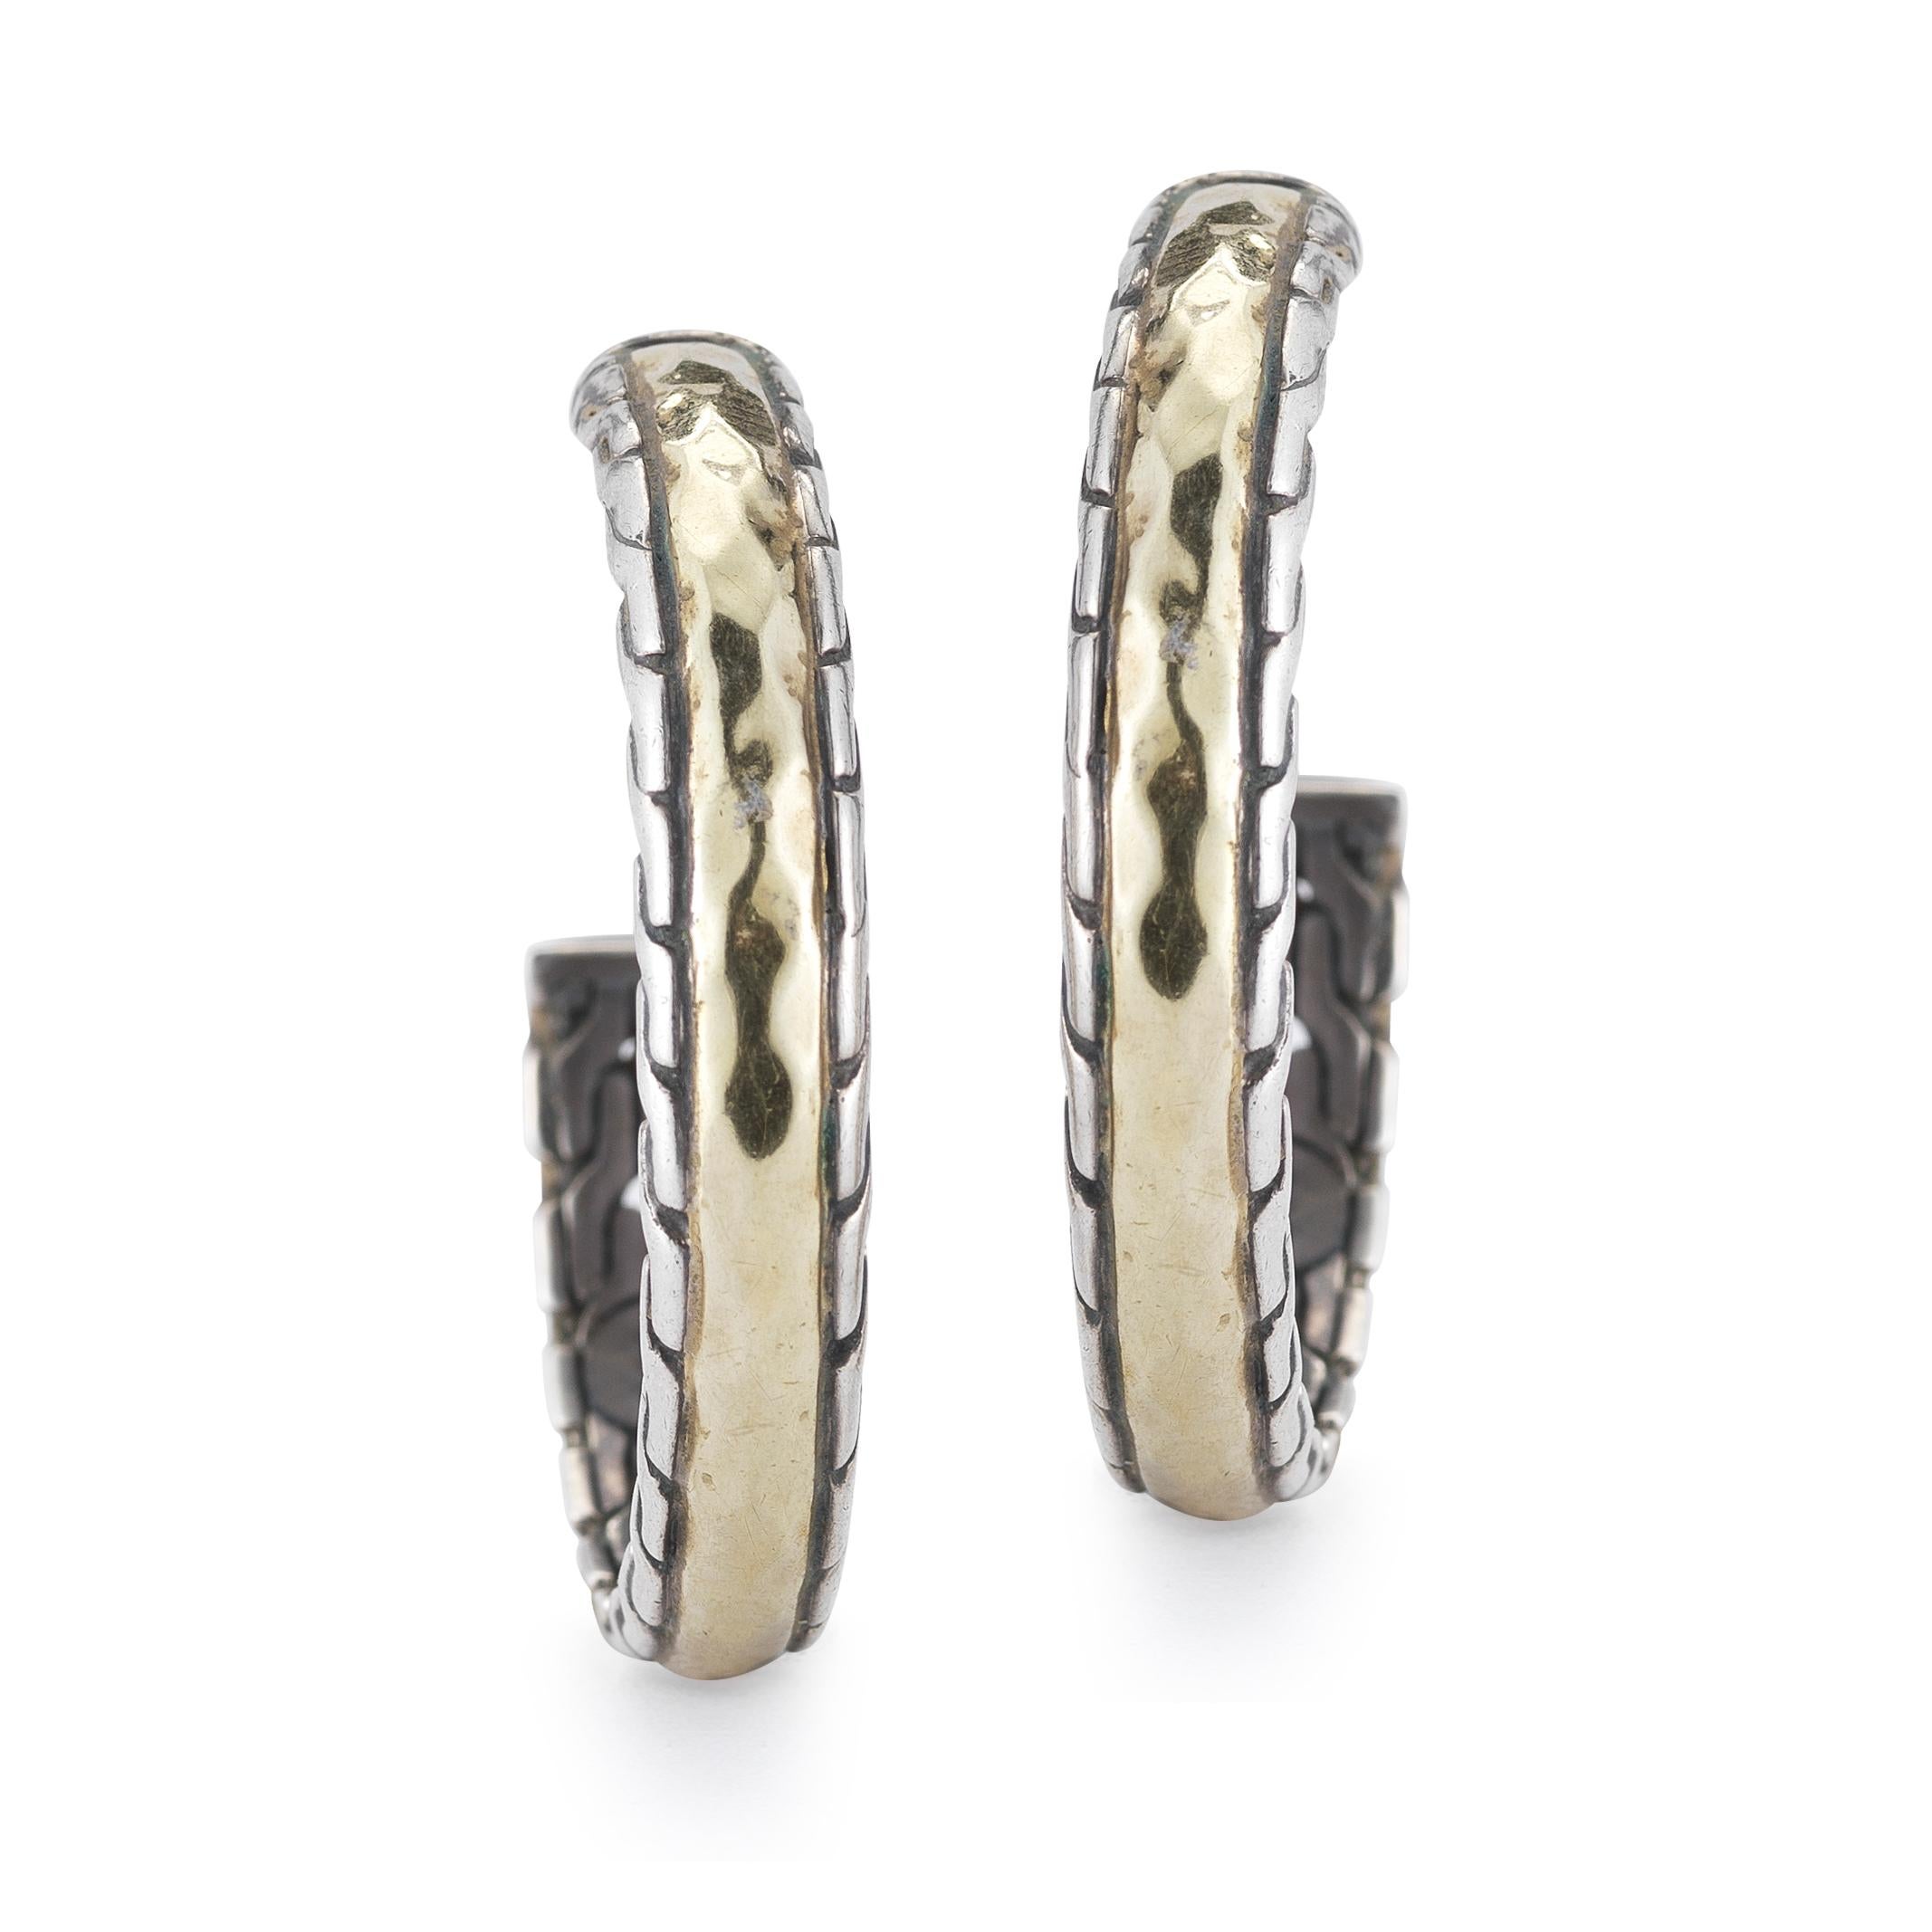 These 22 karat yellow gold and sterling silver medium size hoops from the John Hardy Palu collection are hand hammered with a chain patterned edge. The diameter of the hoops is 1.25 inches.